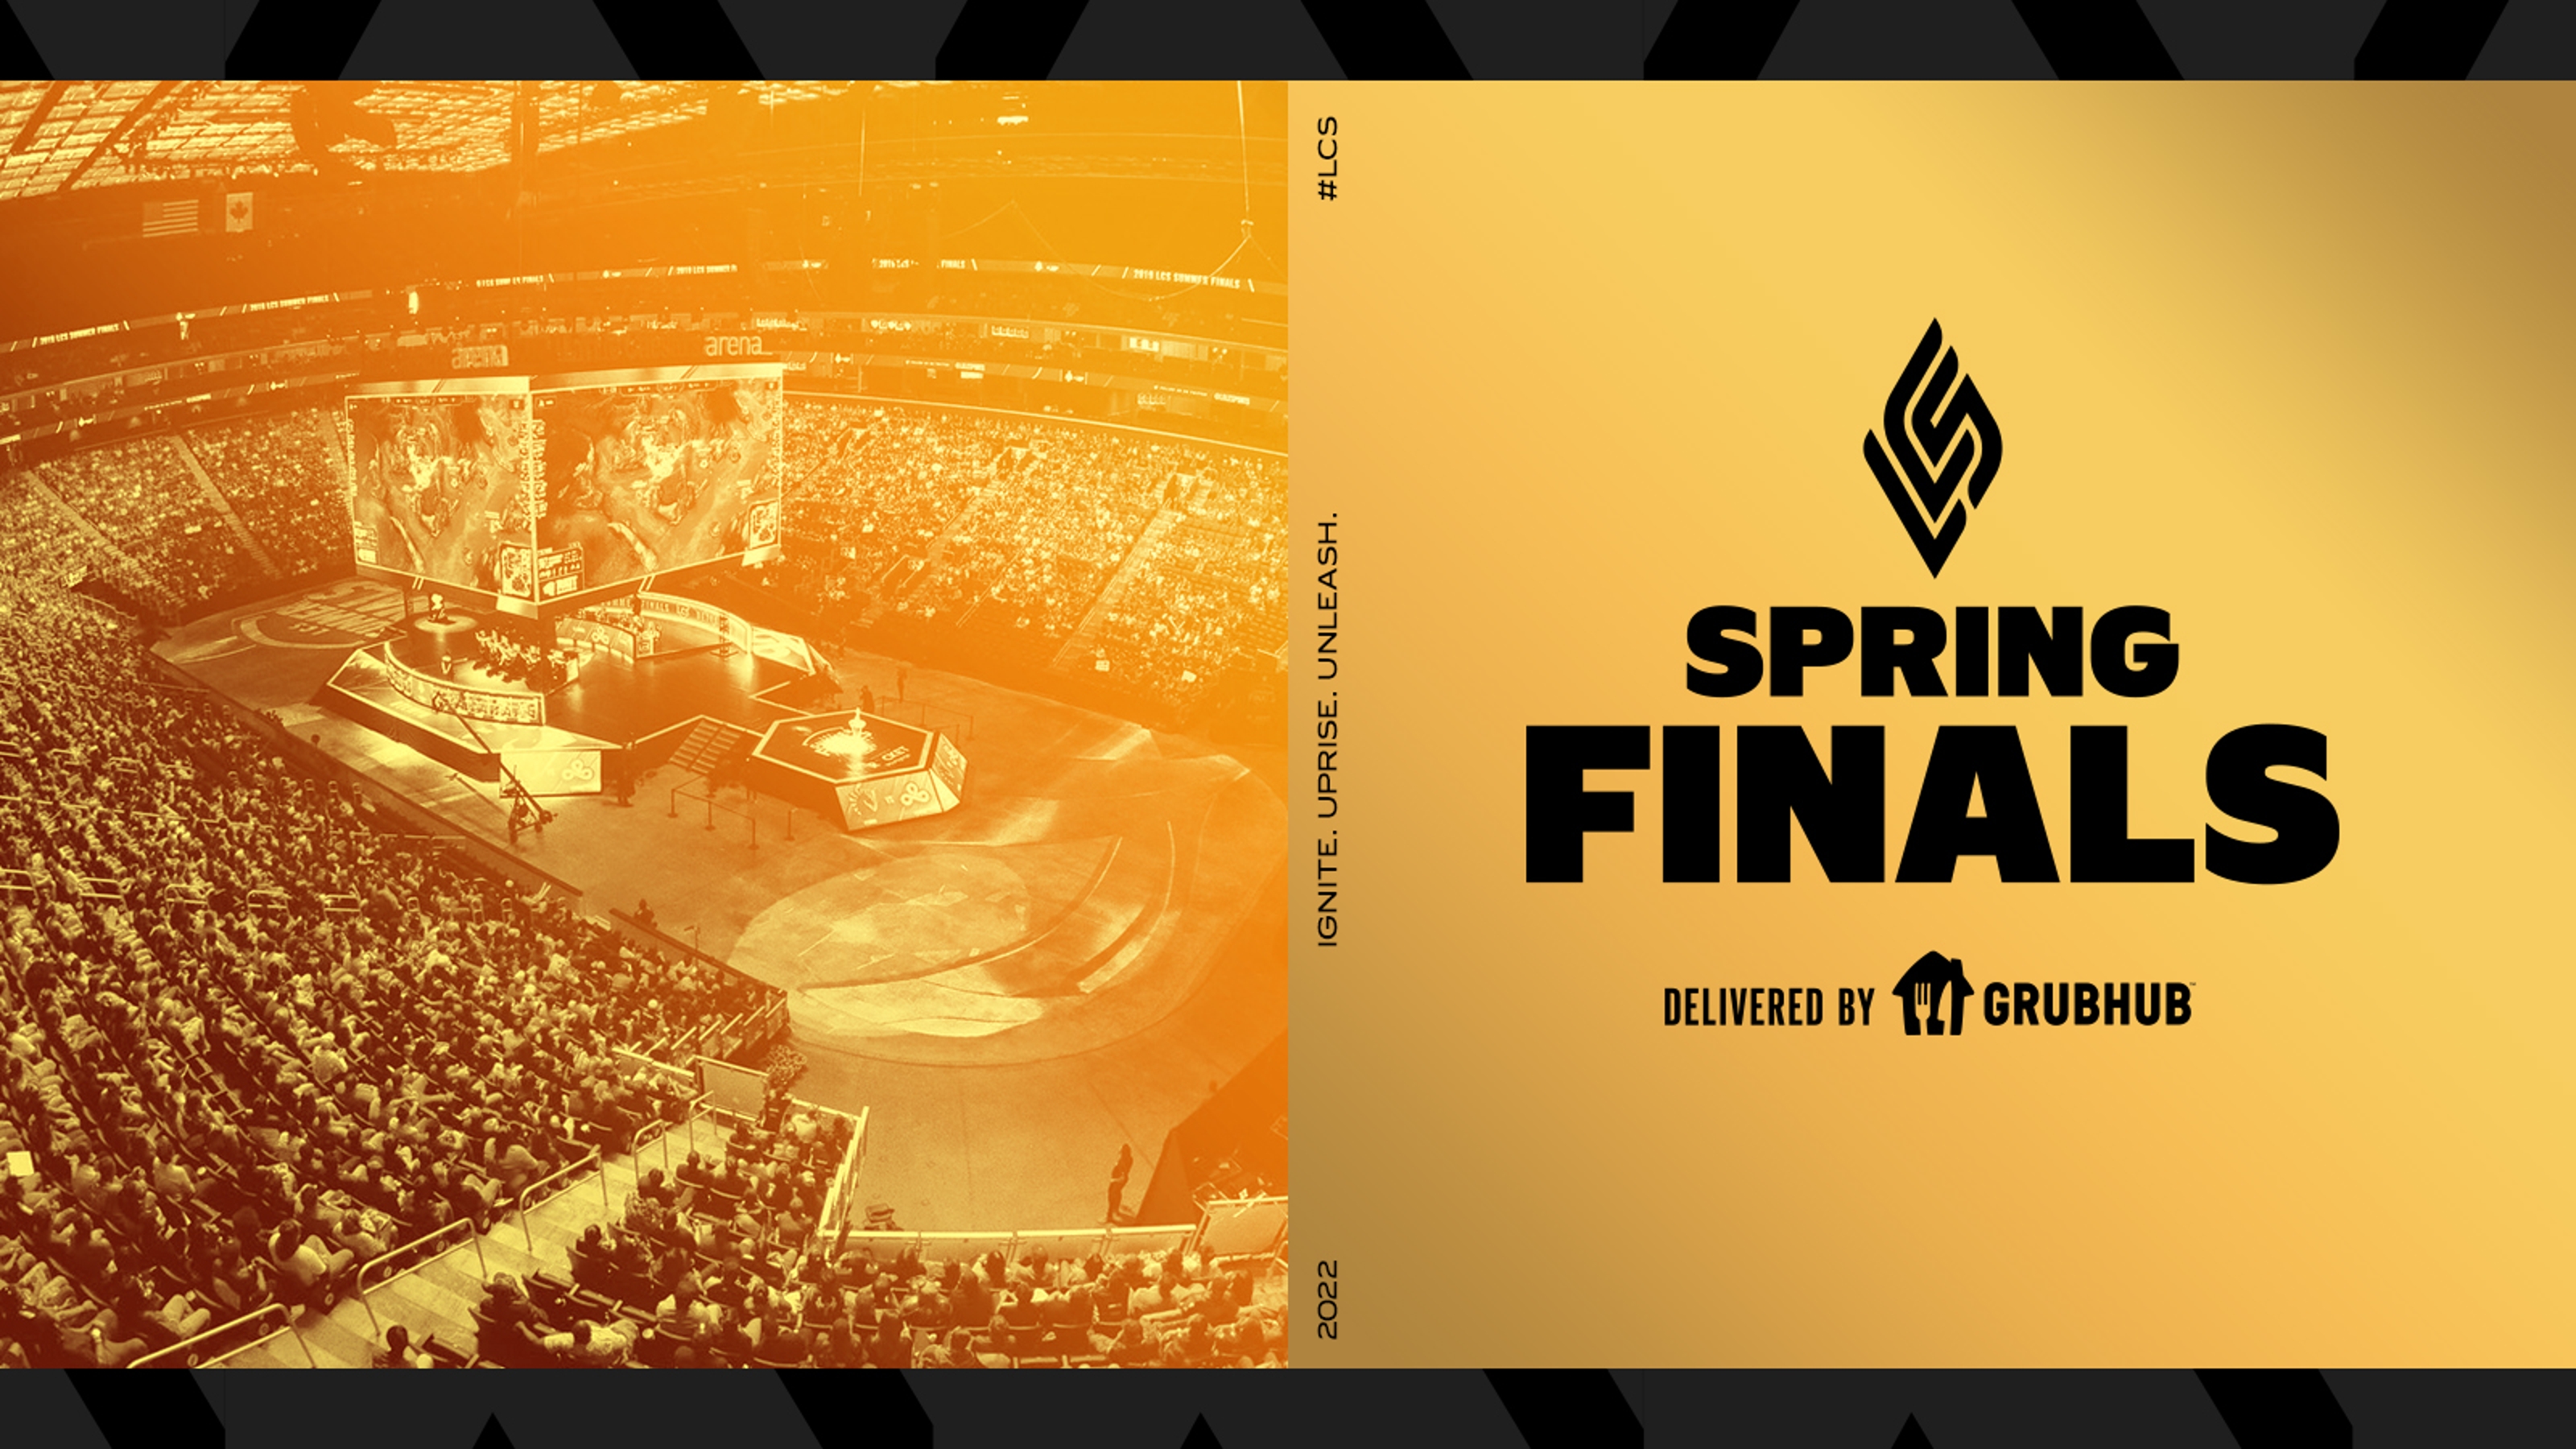 LoL Esports on X: Day Tickets for the 2019 #LEC Spring Finals in